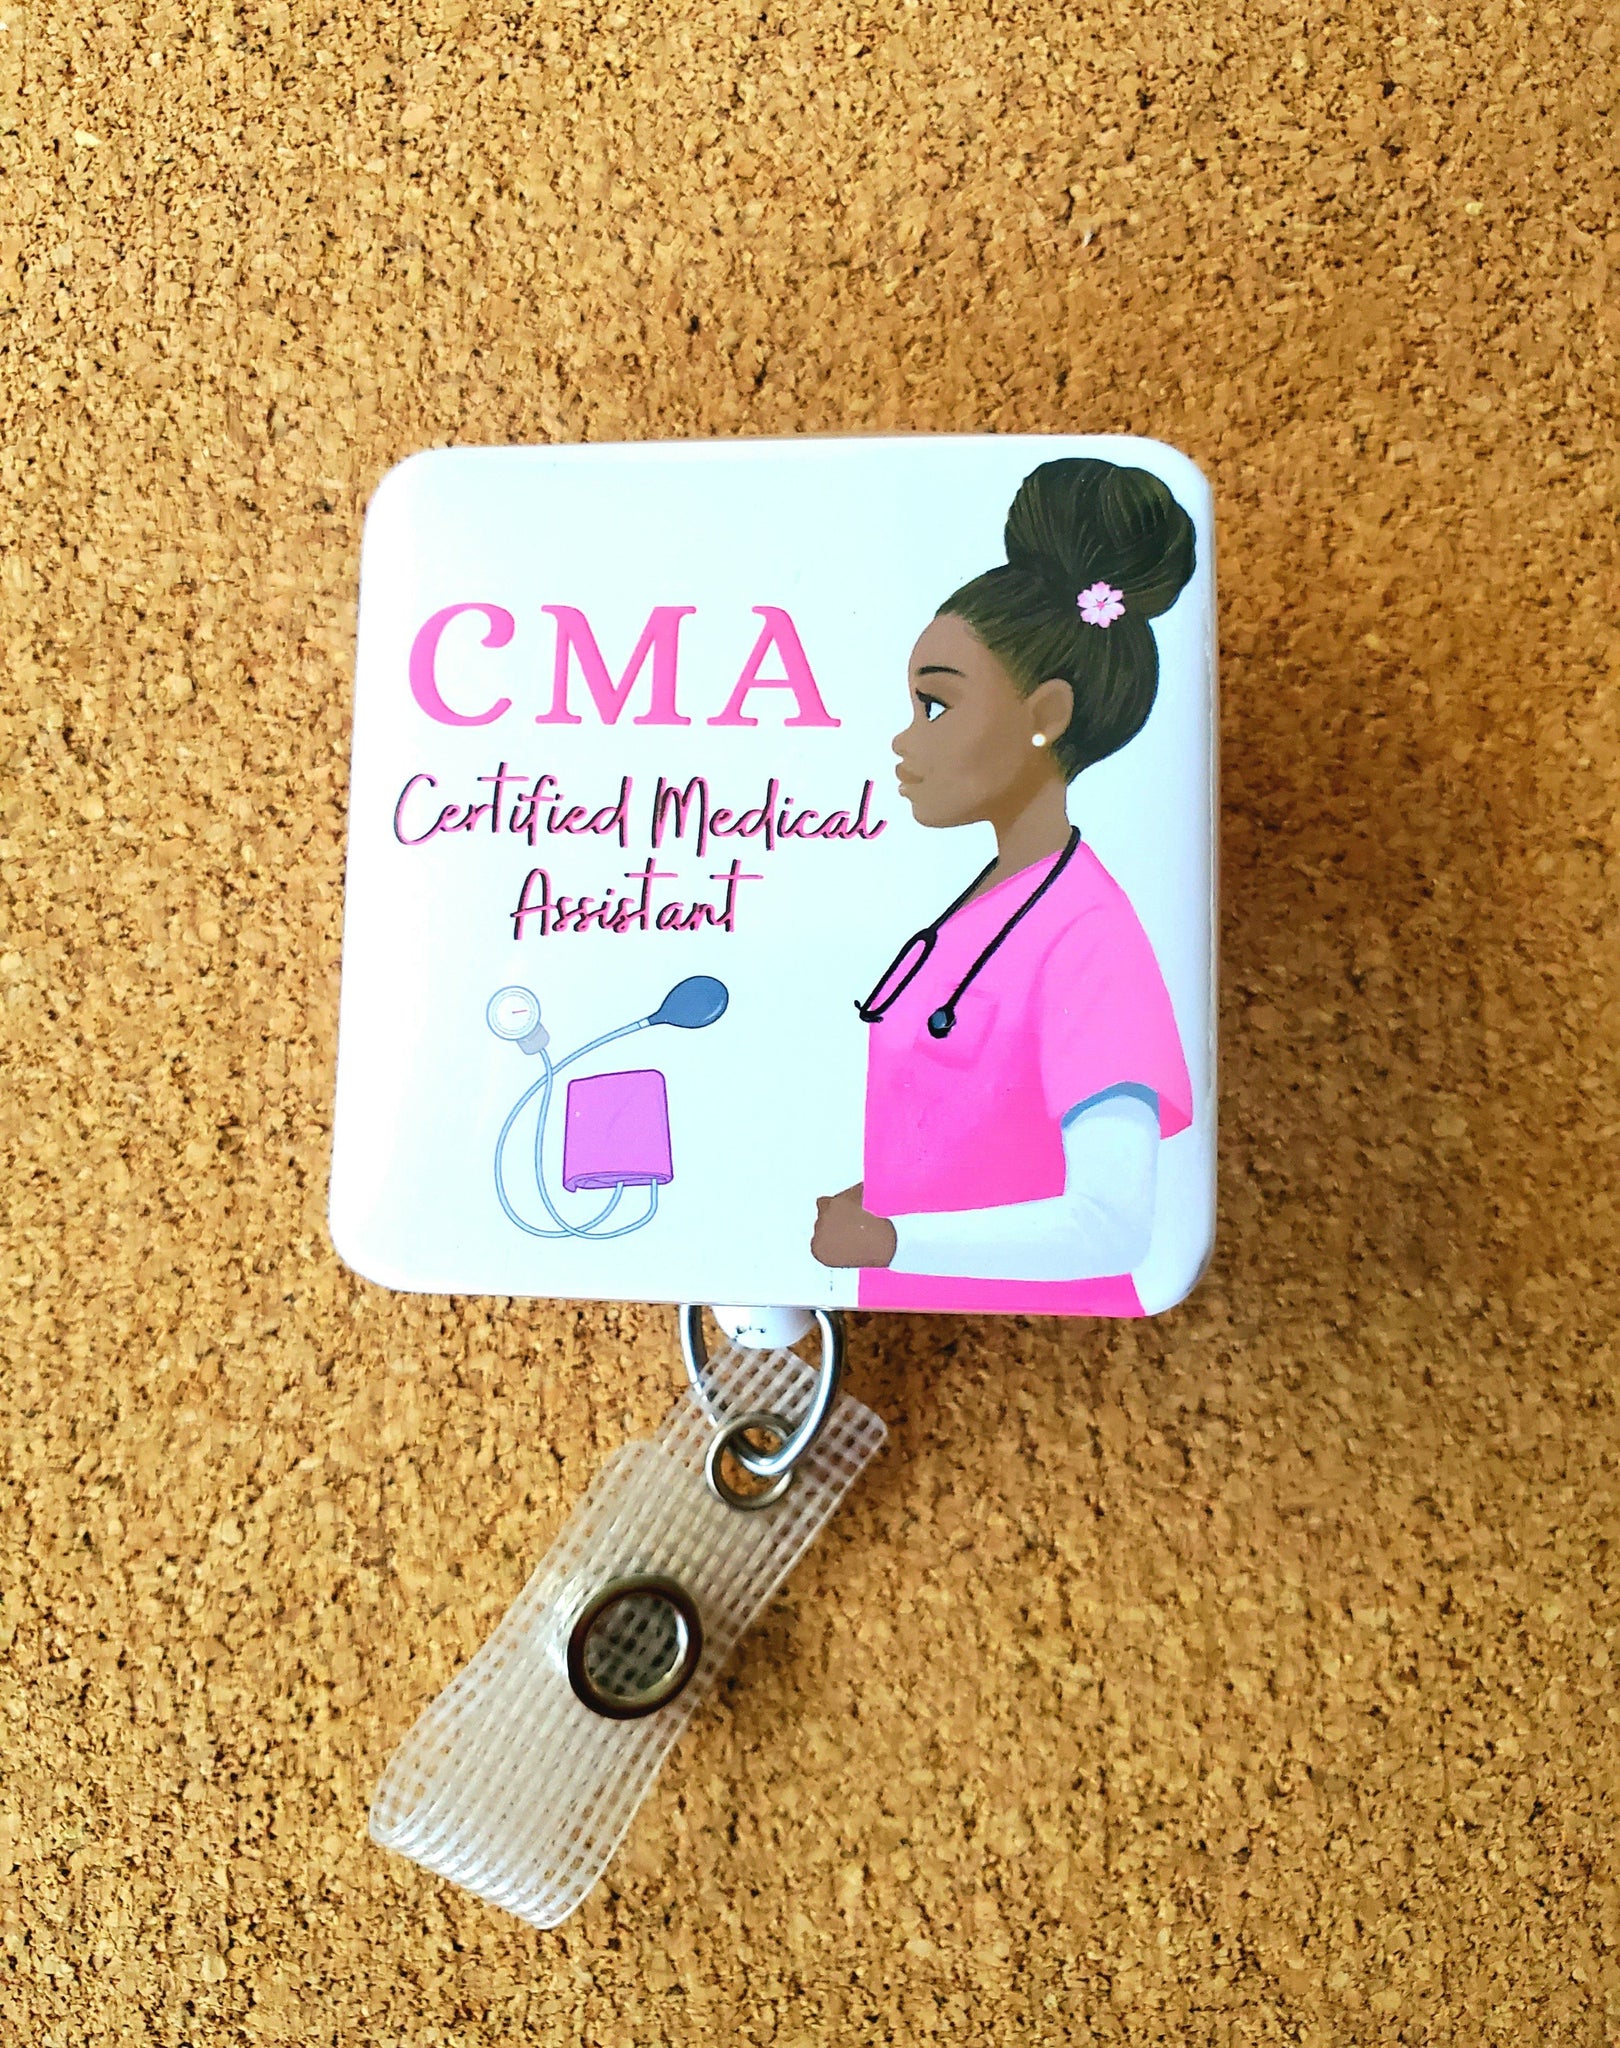 MA CMA Badge Reel For Medical Assistant & Certified, 41% OFF